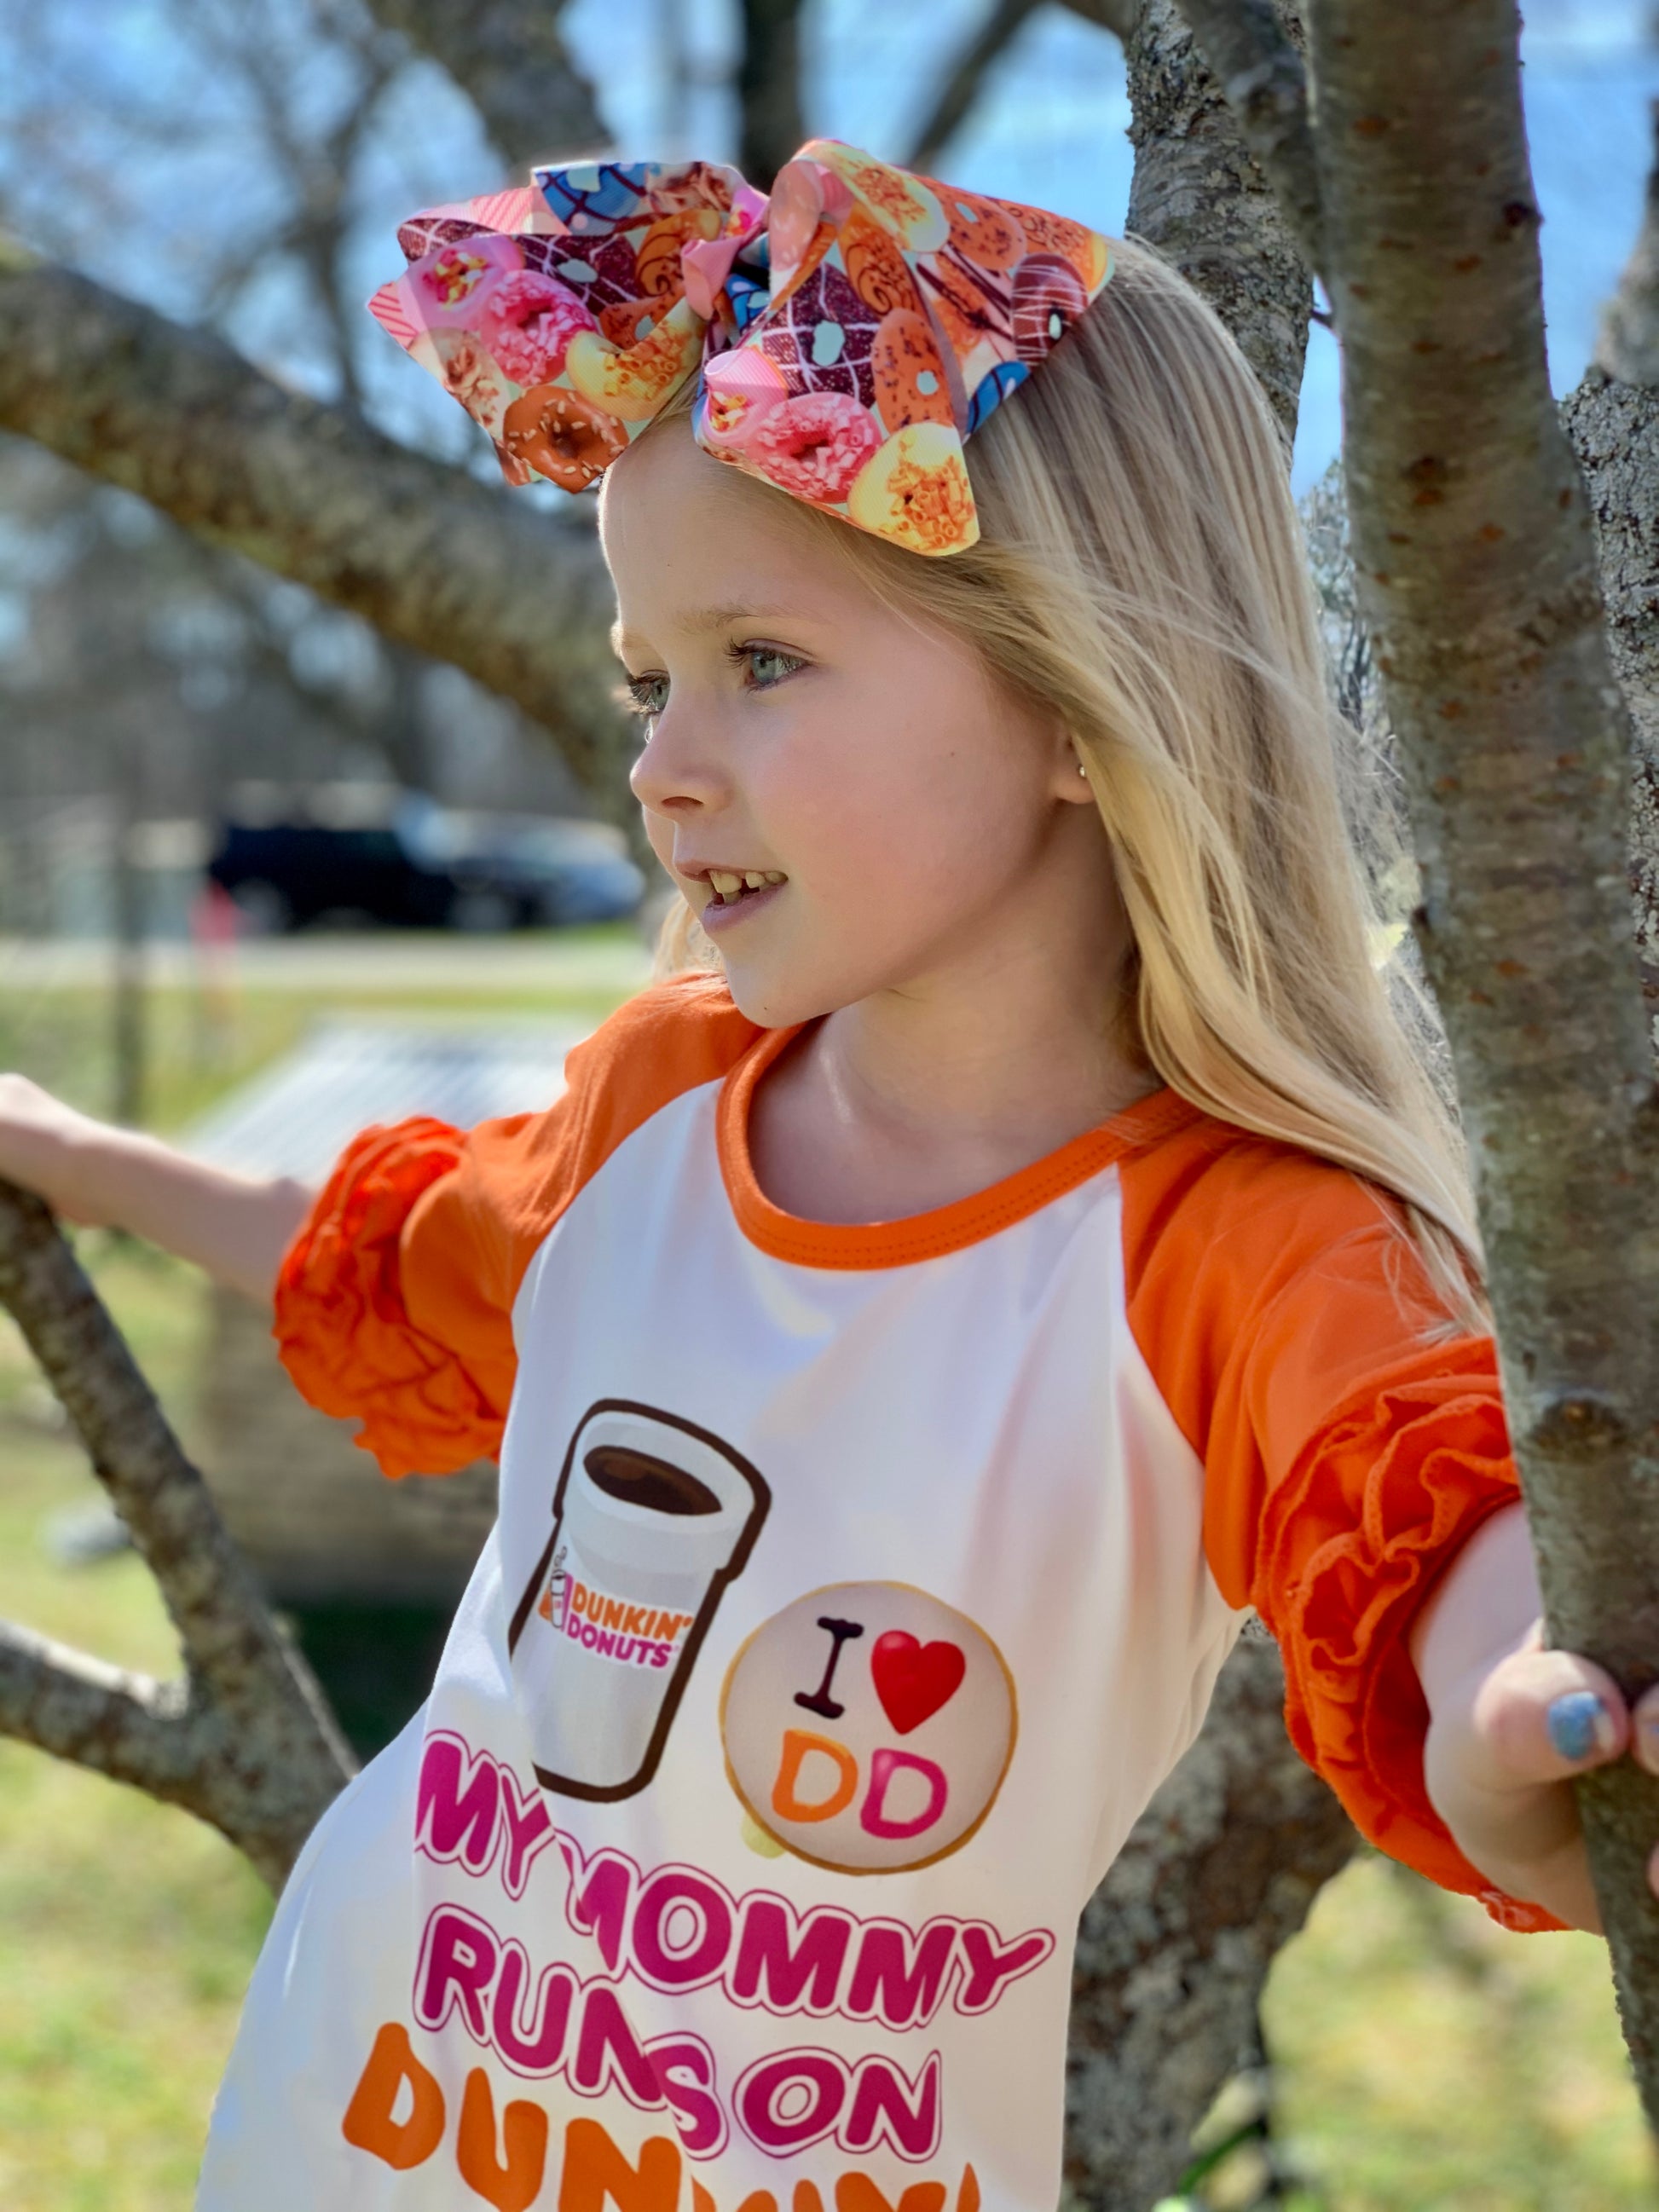 Little girl with blonde hair and a big donut hair bow in a Dunkin Donuts shirt